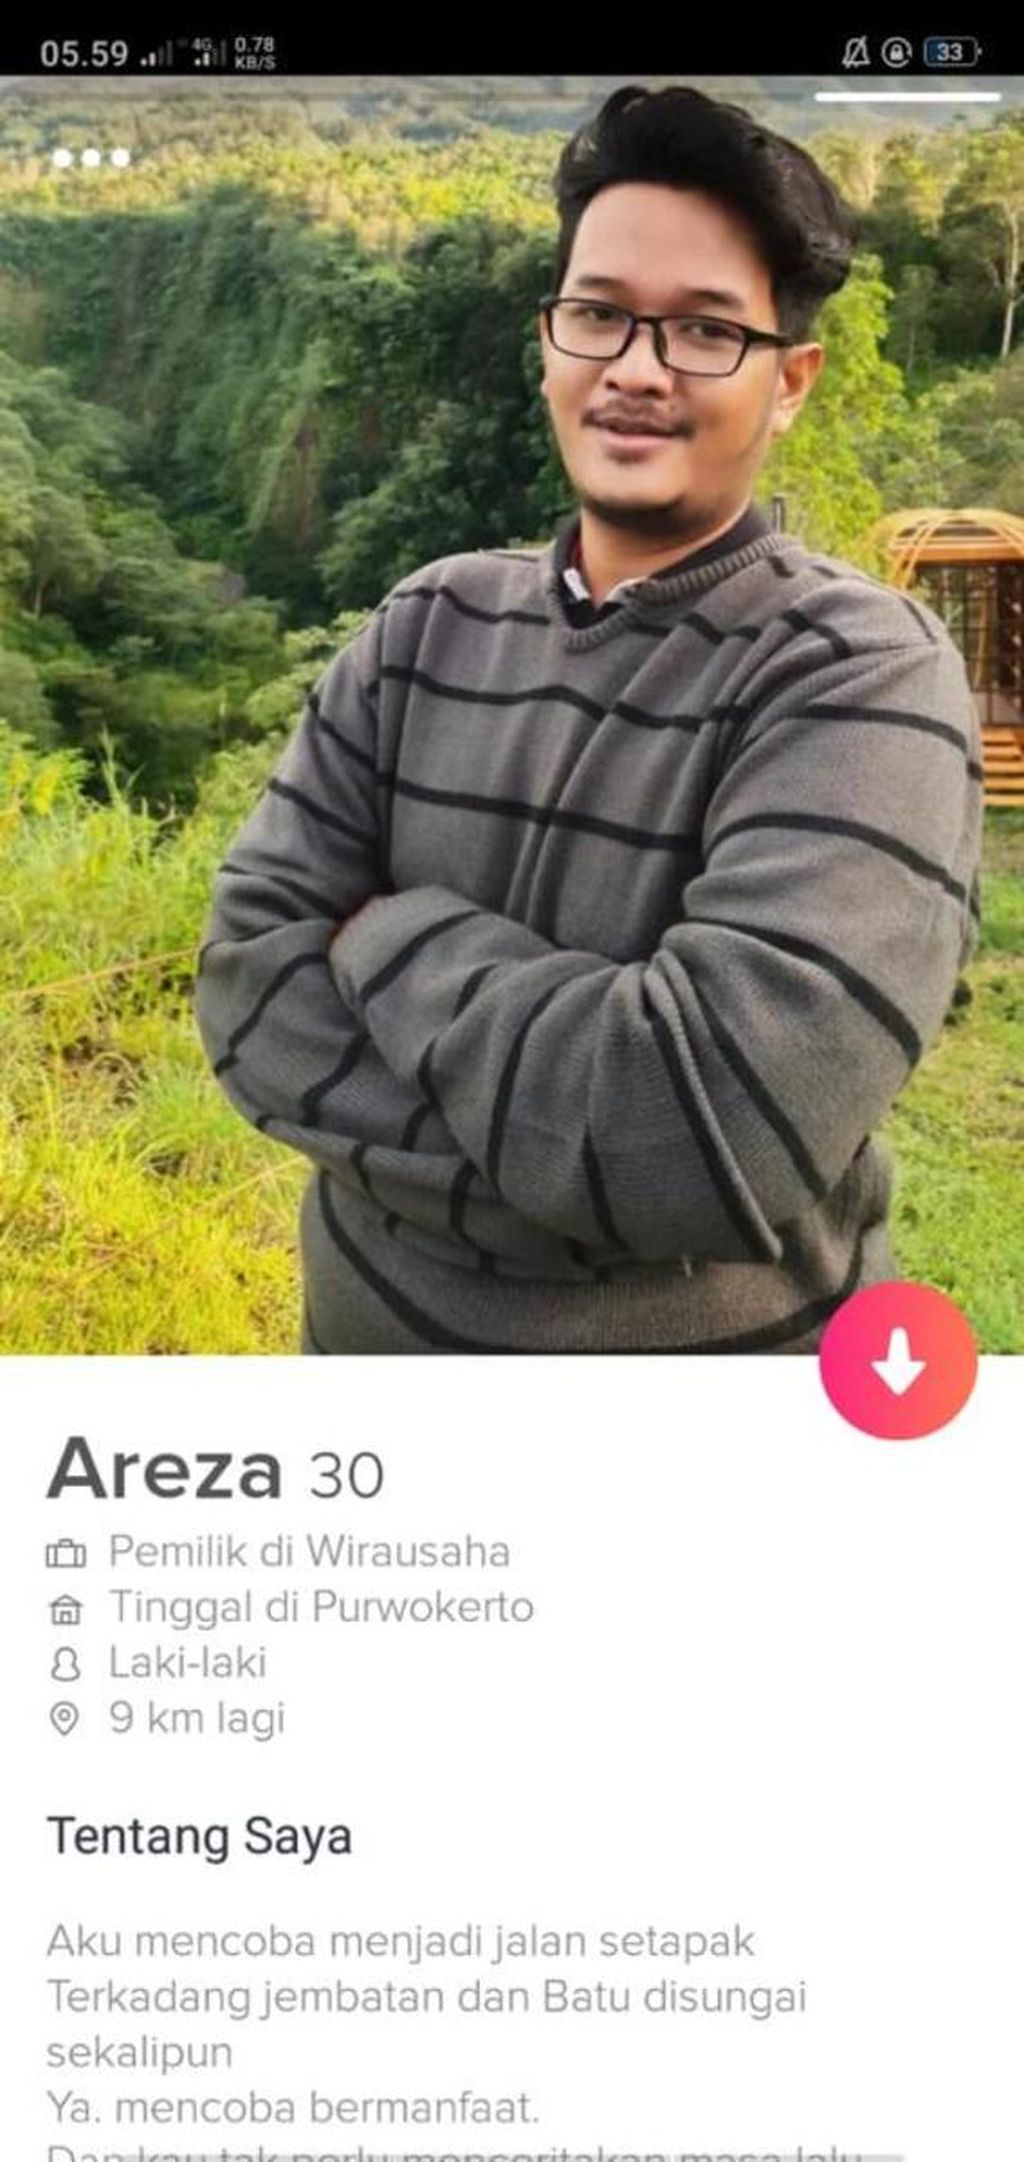 Tinder profile Faris Ahmad Faza (31) when he was active on Tinder in Purwokerto, Central Java, last May-November 2021. Faza has been reported to four police stations in Purwokerto, Kediri and Tulungagung.